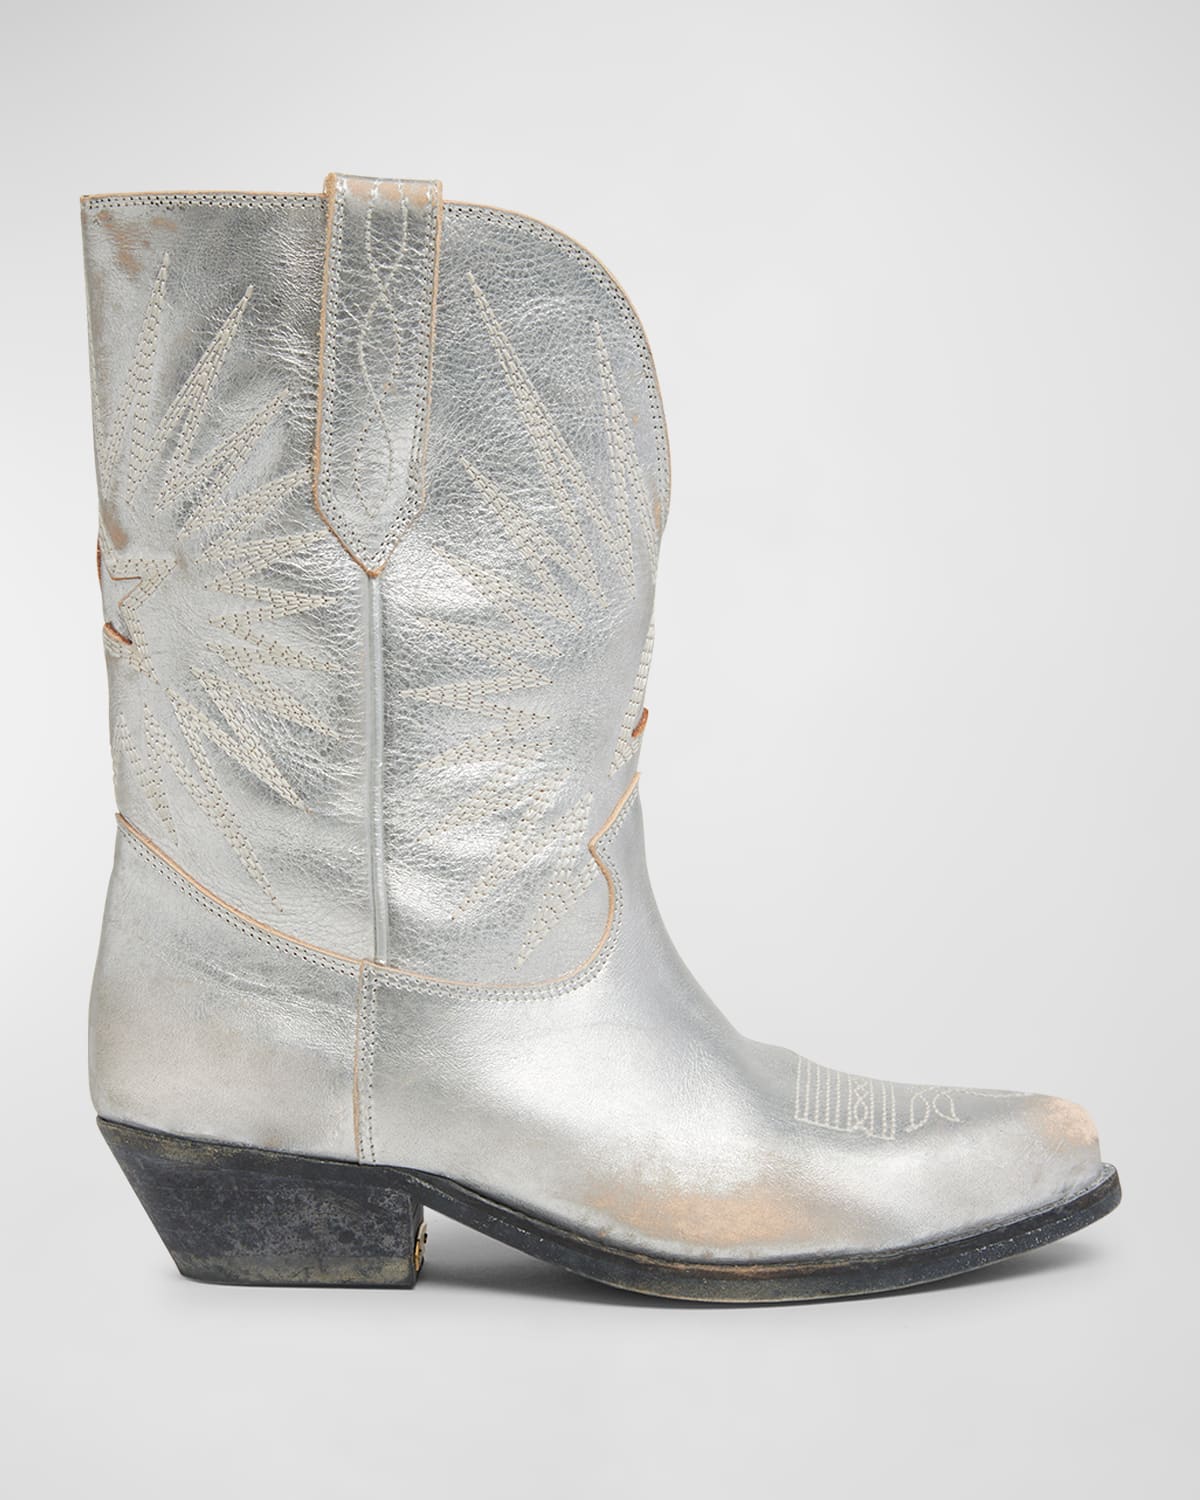 Shop Golden Goose Wish Star Metallic Distressed Cowboy Boots In Silver